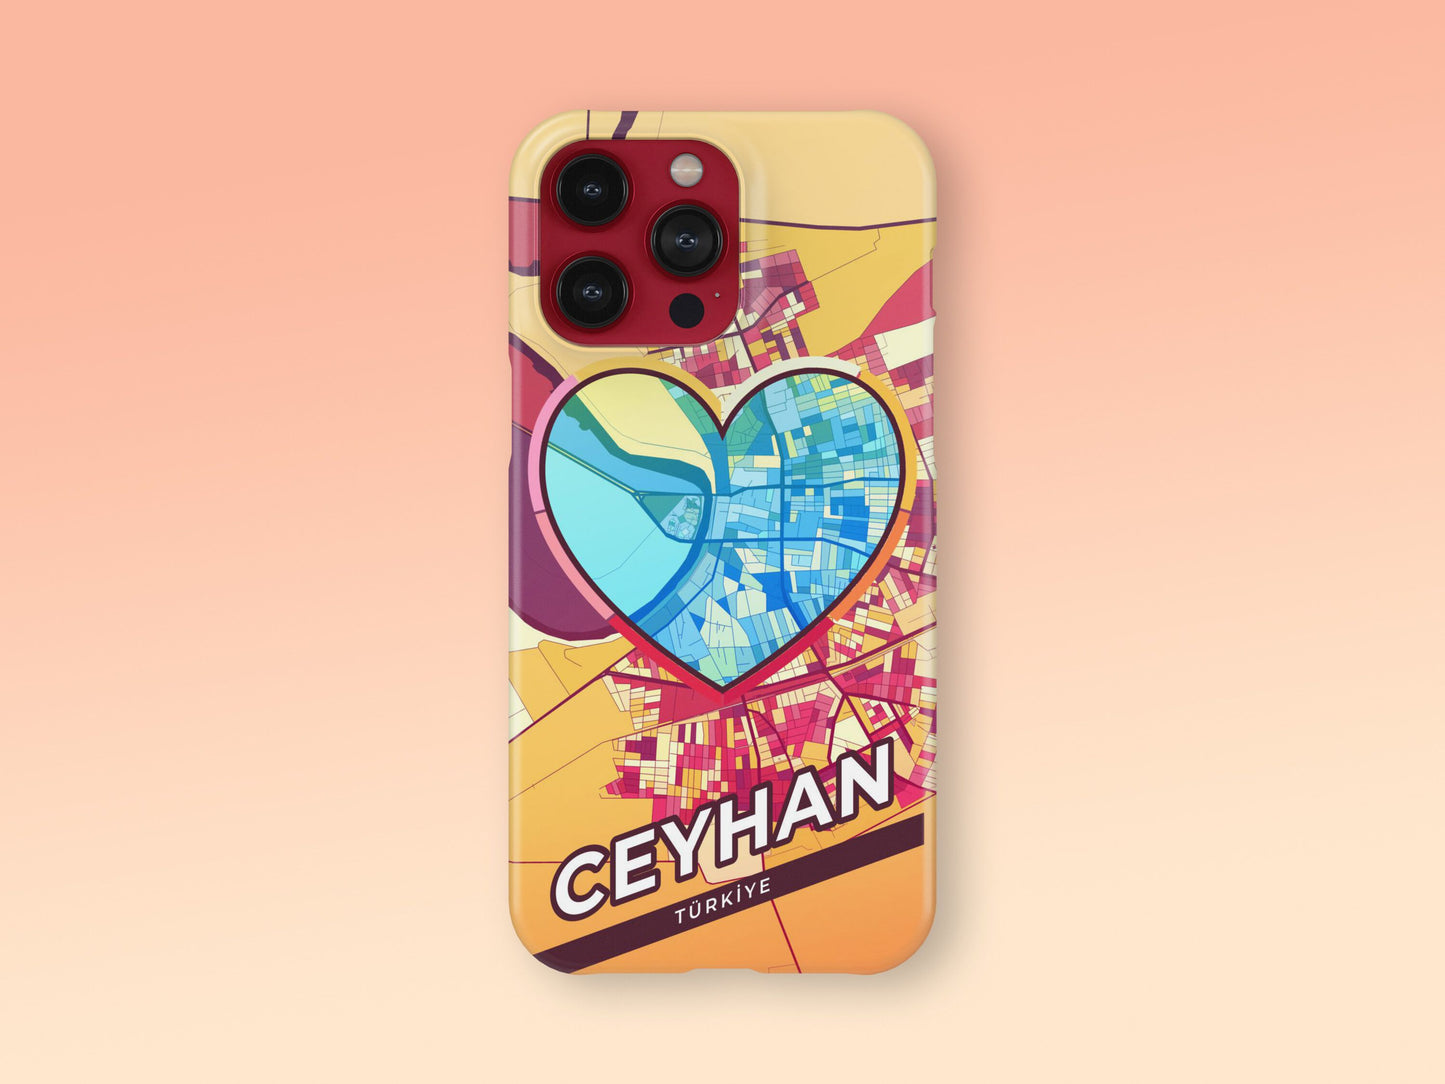 Ceyhan Turkey slim phone case with colorful icon. Birthday, wedding or housewarming gift. Couple match cases. 2